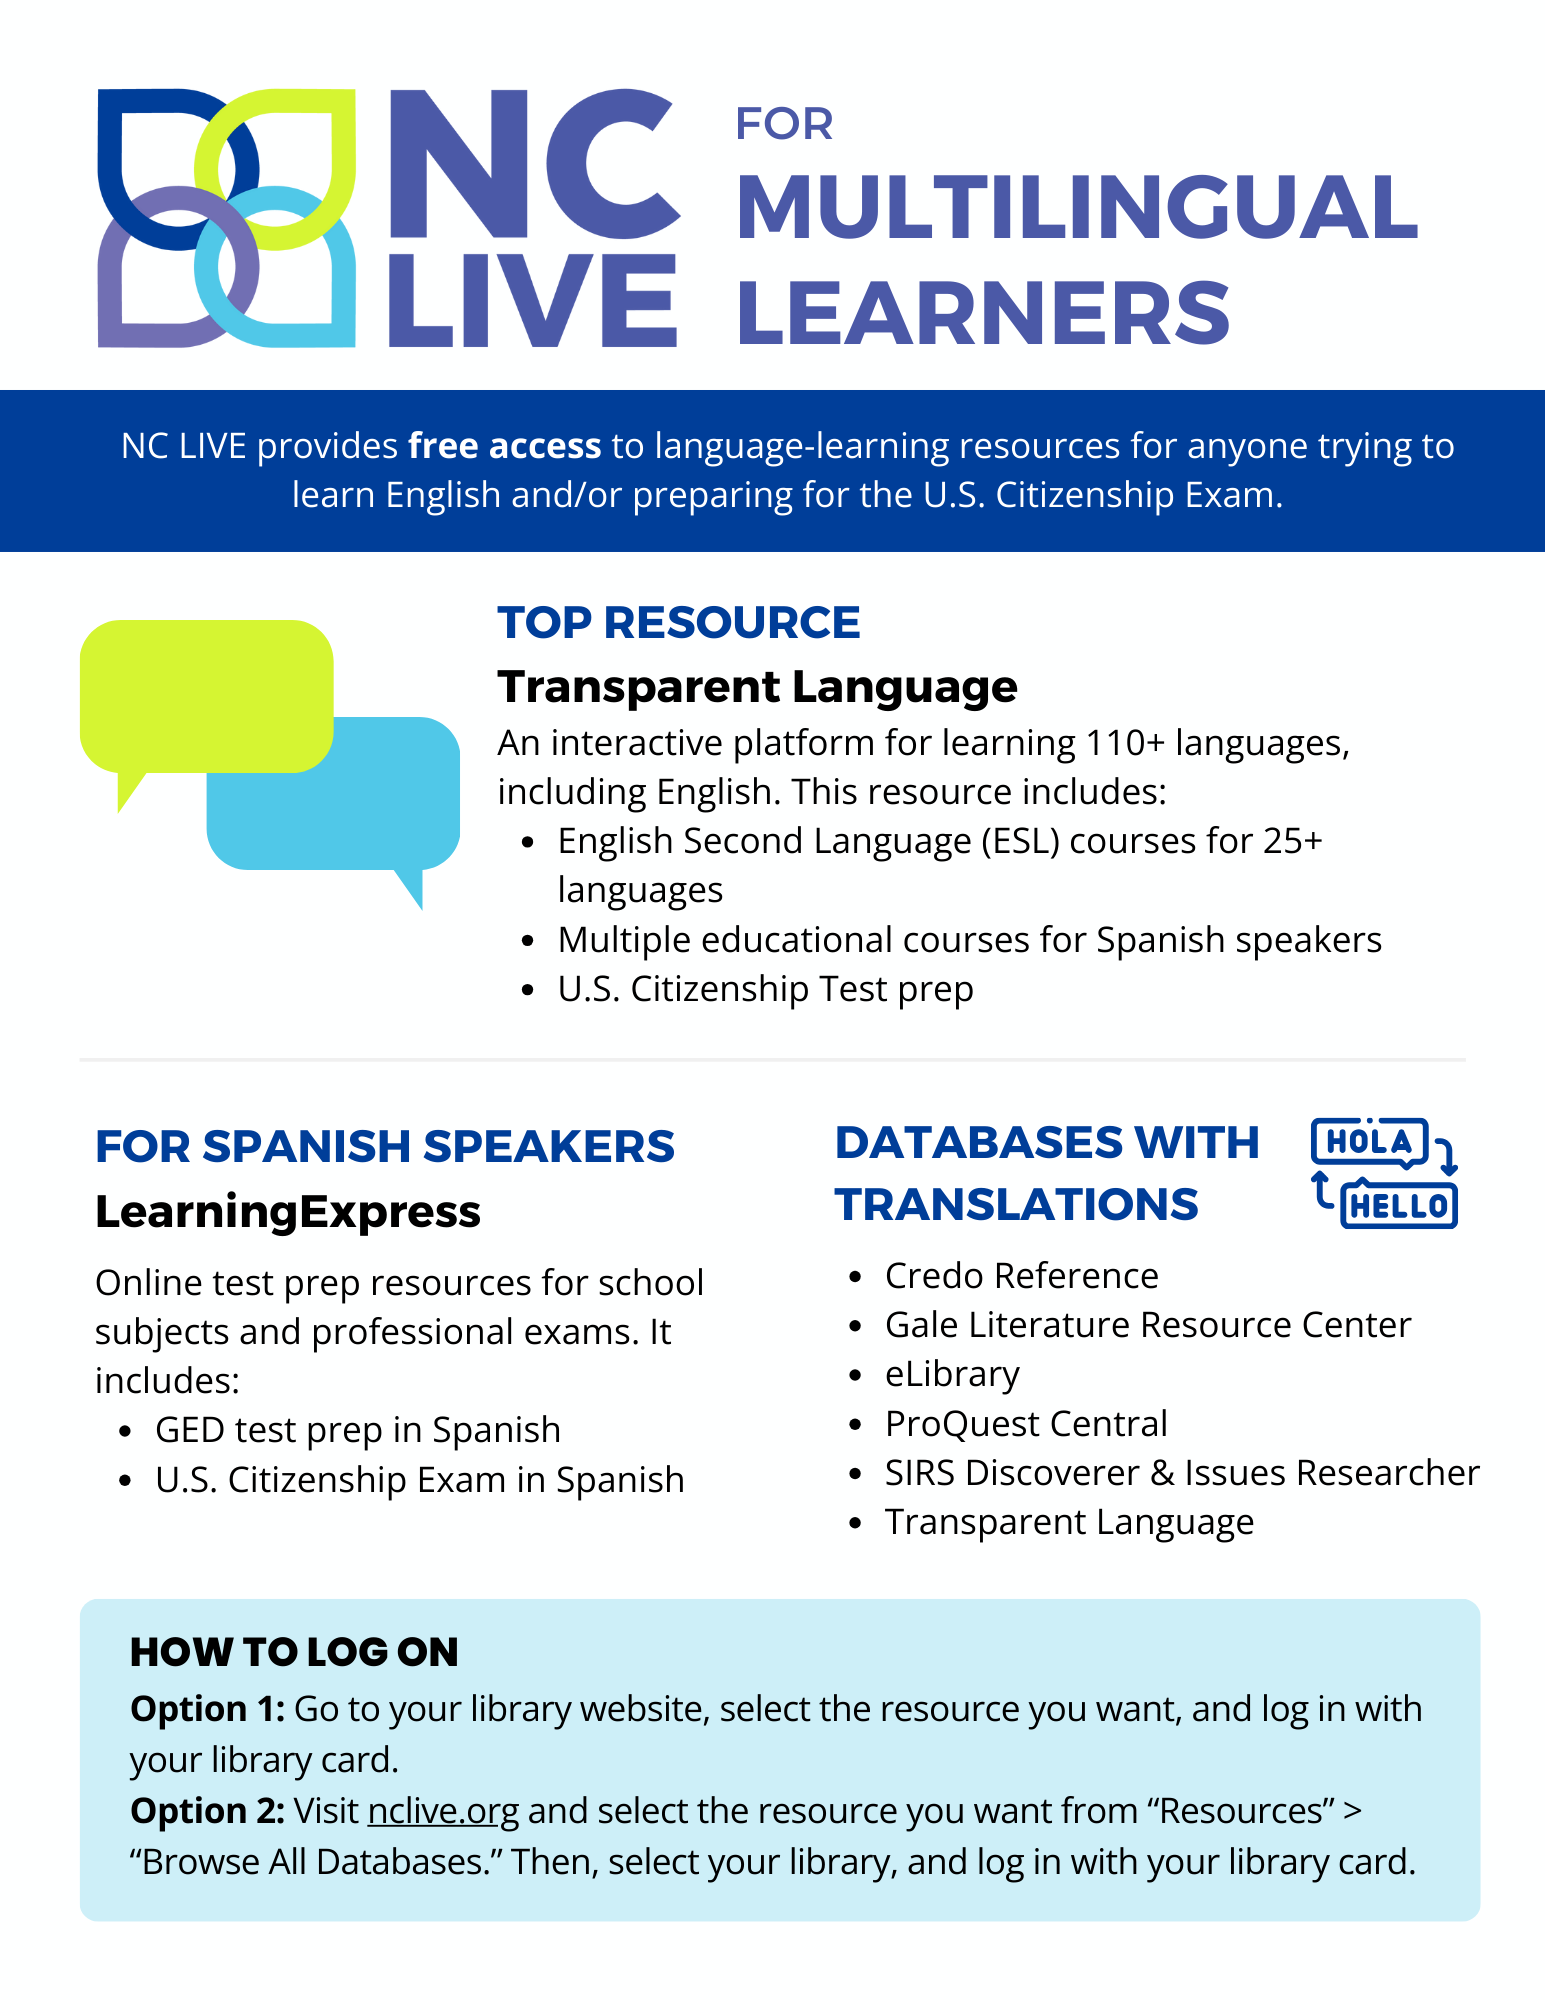 A flyer with two speech bubbles and information about resources in languages other than English.